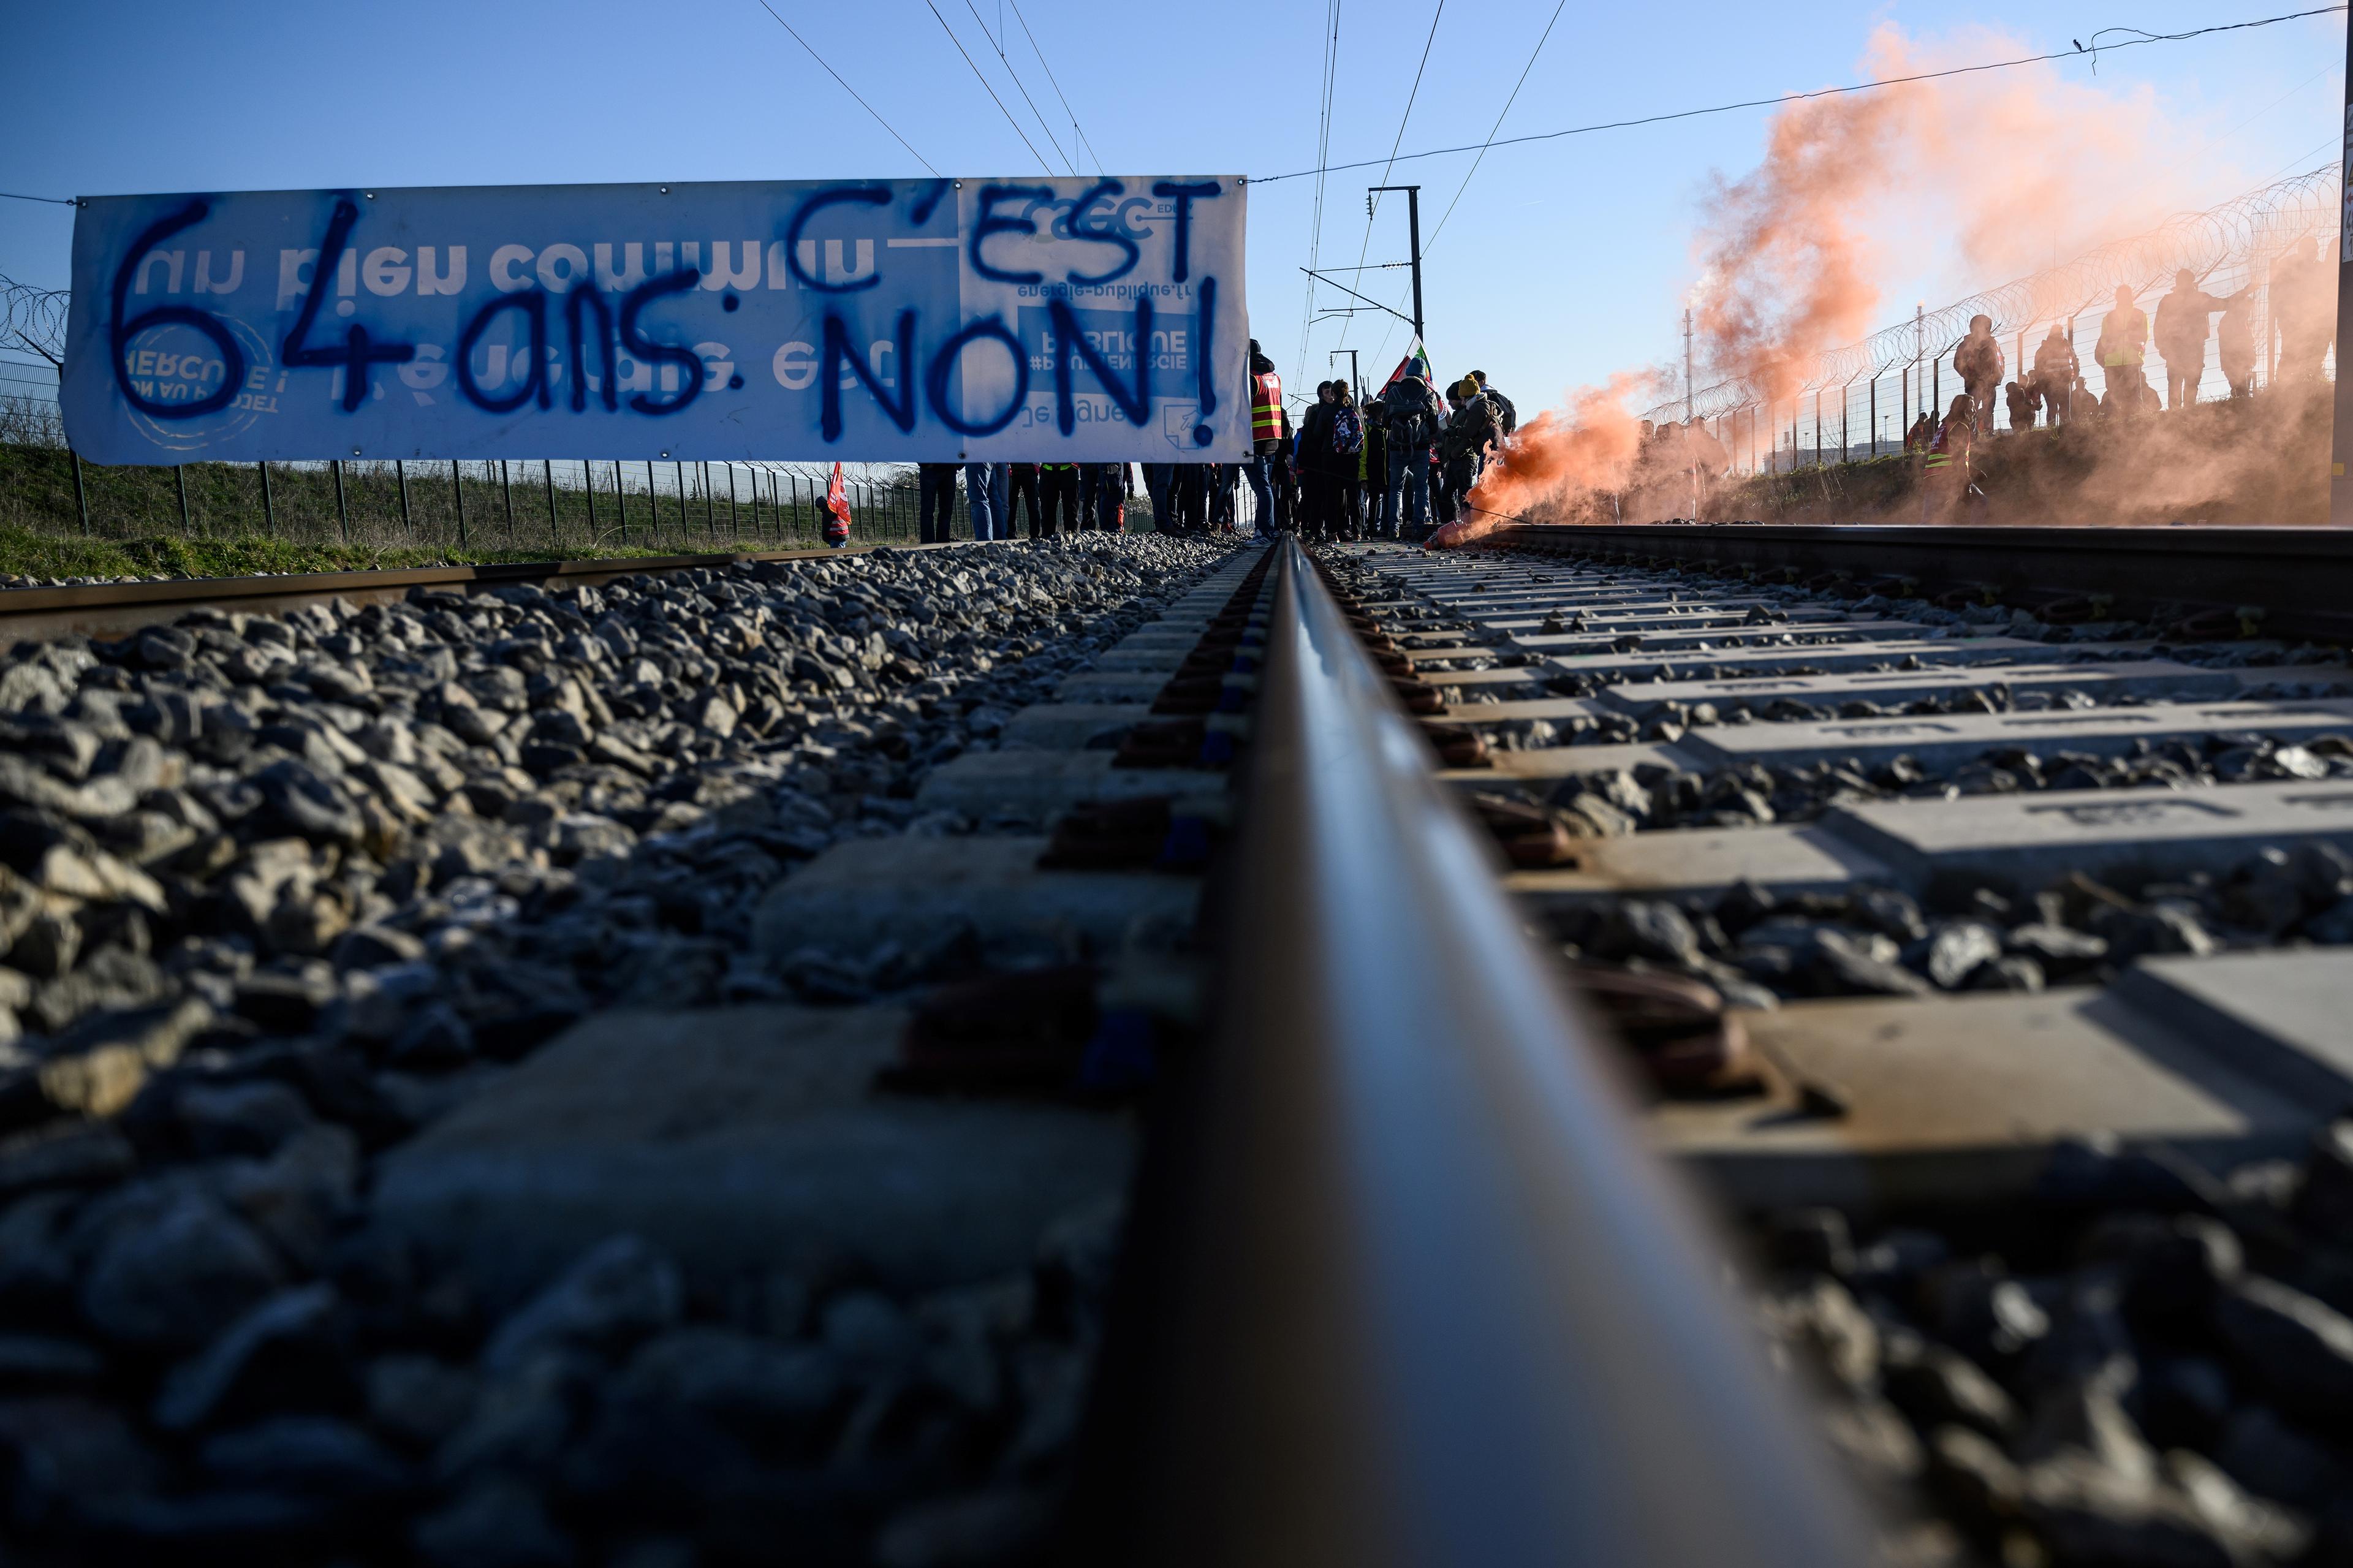 Protesters stand on the rail tracks behind a banner reading "64 years old, it's no" during an action called by the French union General Confederation of Labour (CGT) to protest against a deeply unpopular pensions overhaul in Donges, Western France on February 8, 2023. - France braced on February 7, 2023 for new strikes and mass demonstrations against French President's proposal to reform French pensions, including hiking the retirement age from 62 to 64 and increasing the number of years people must make contributions for a full pension. (Photo by LOIC VENANCE / AFP)